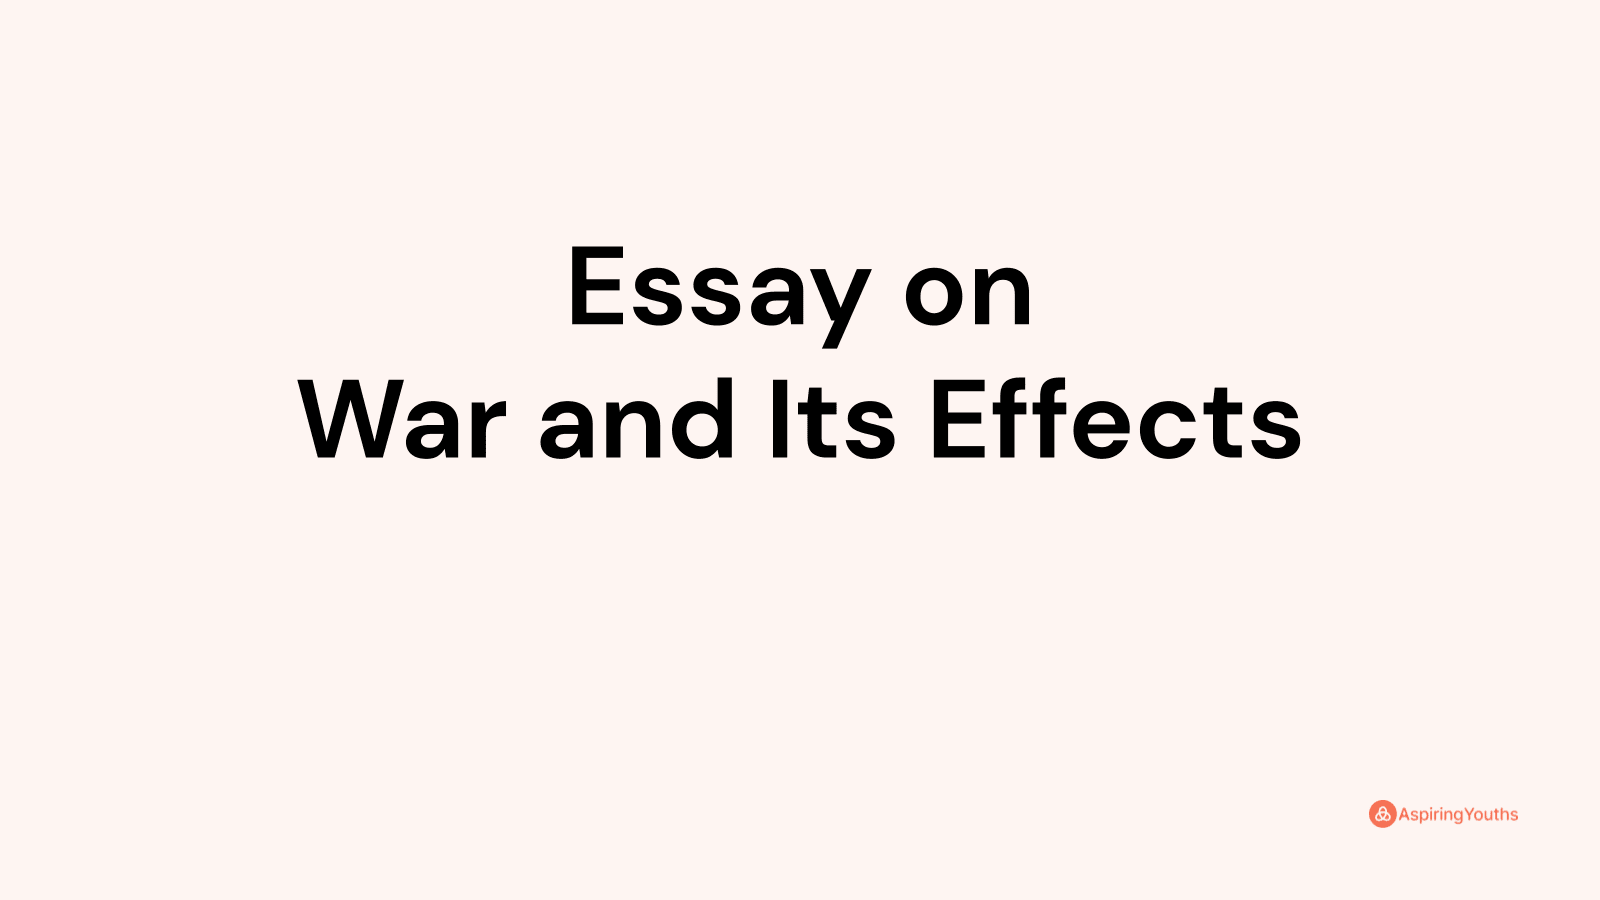 essay on war and its effects in 250 words